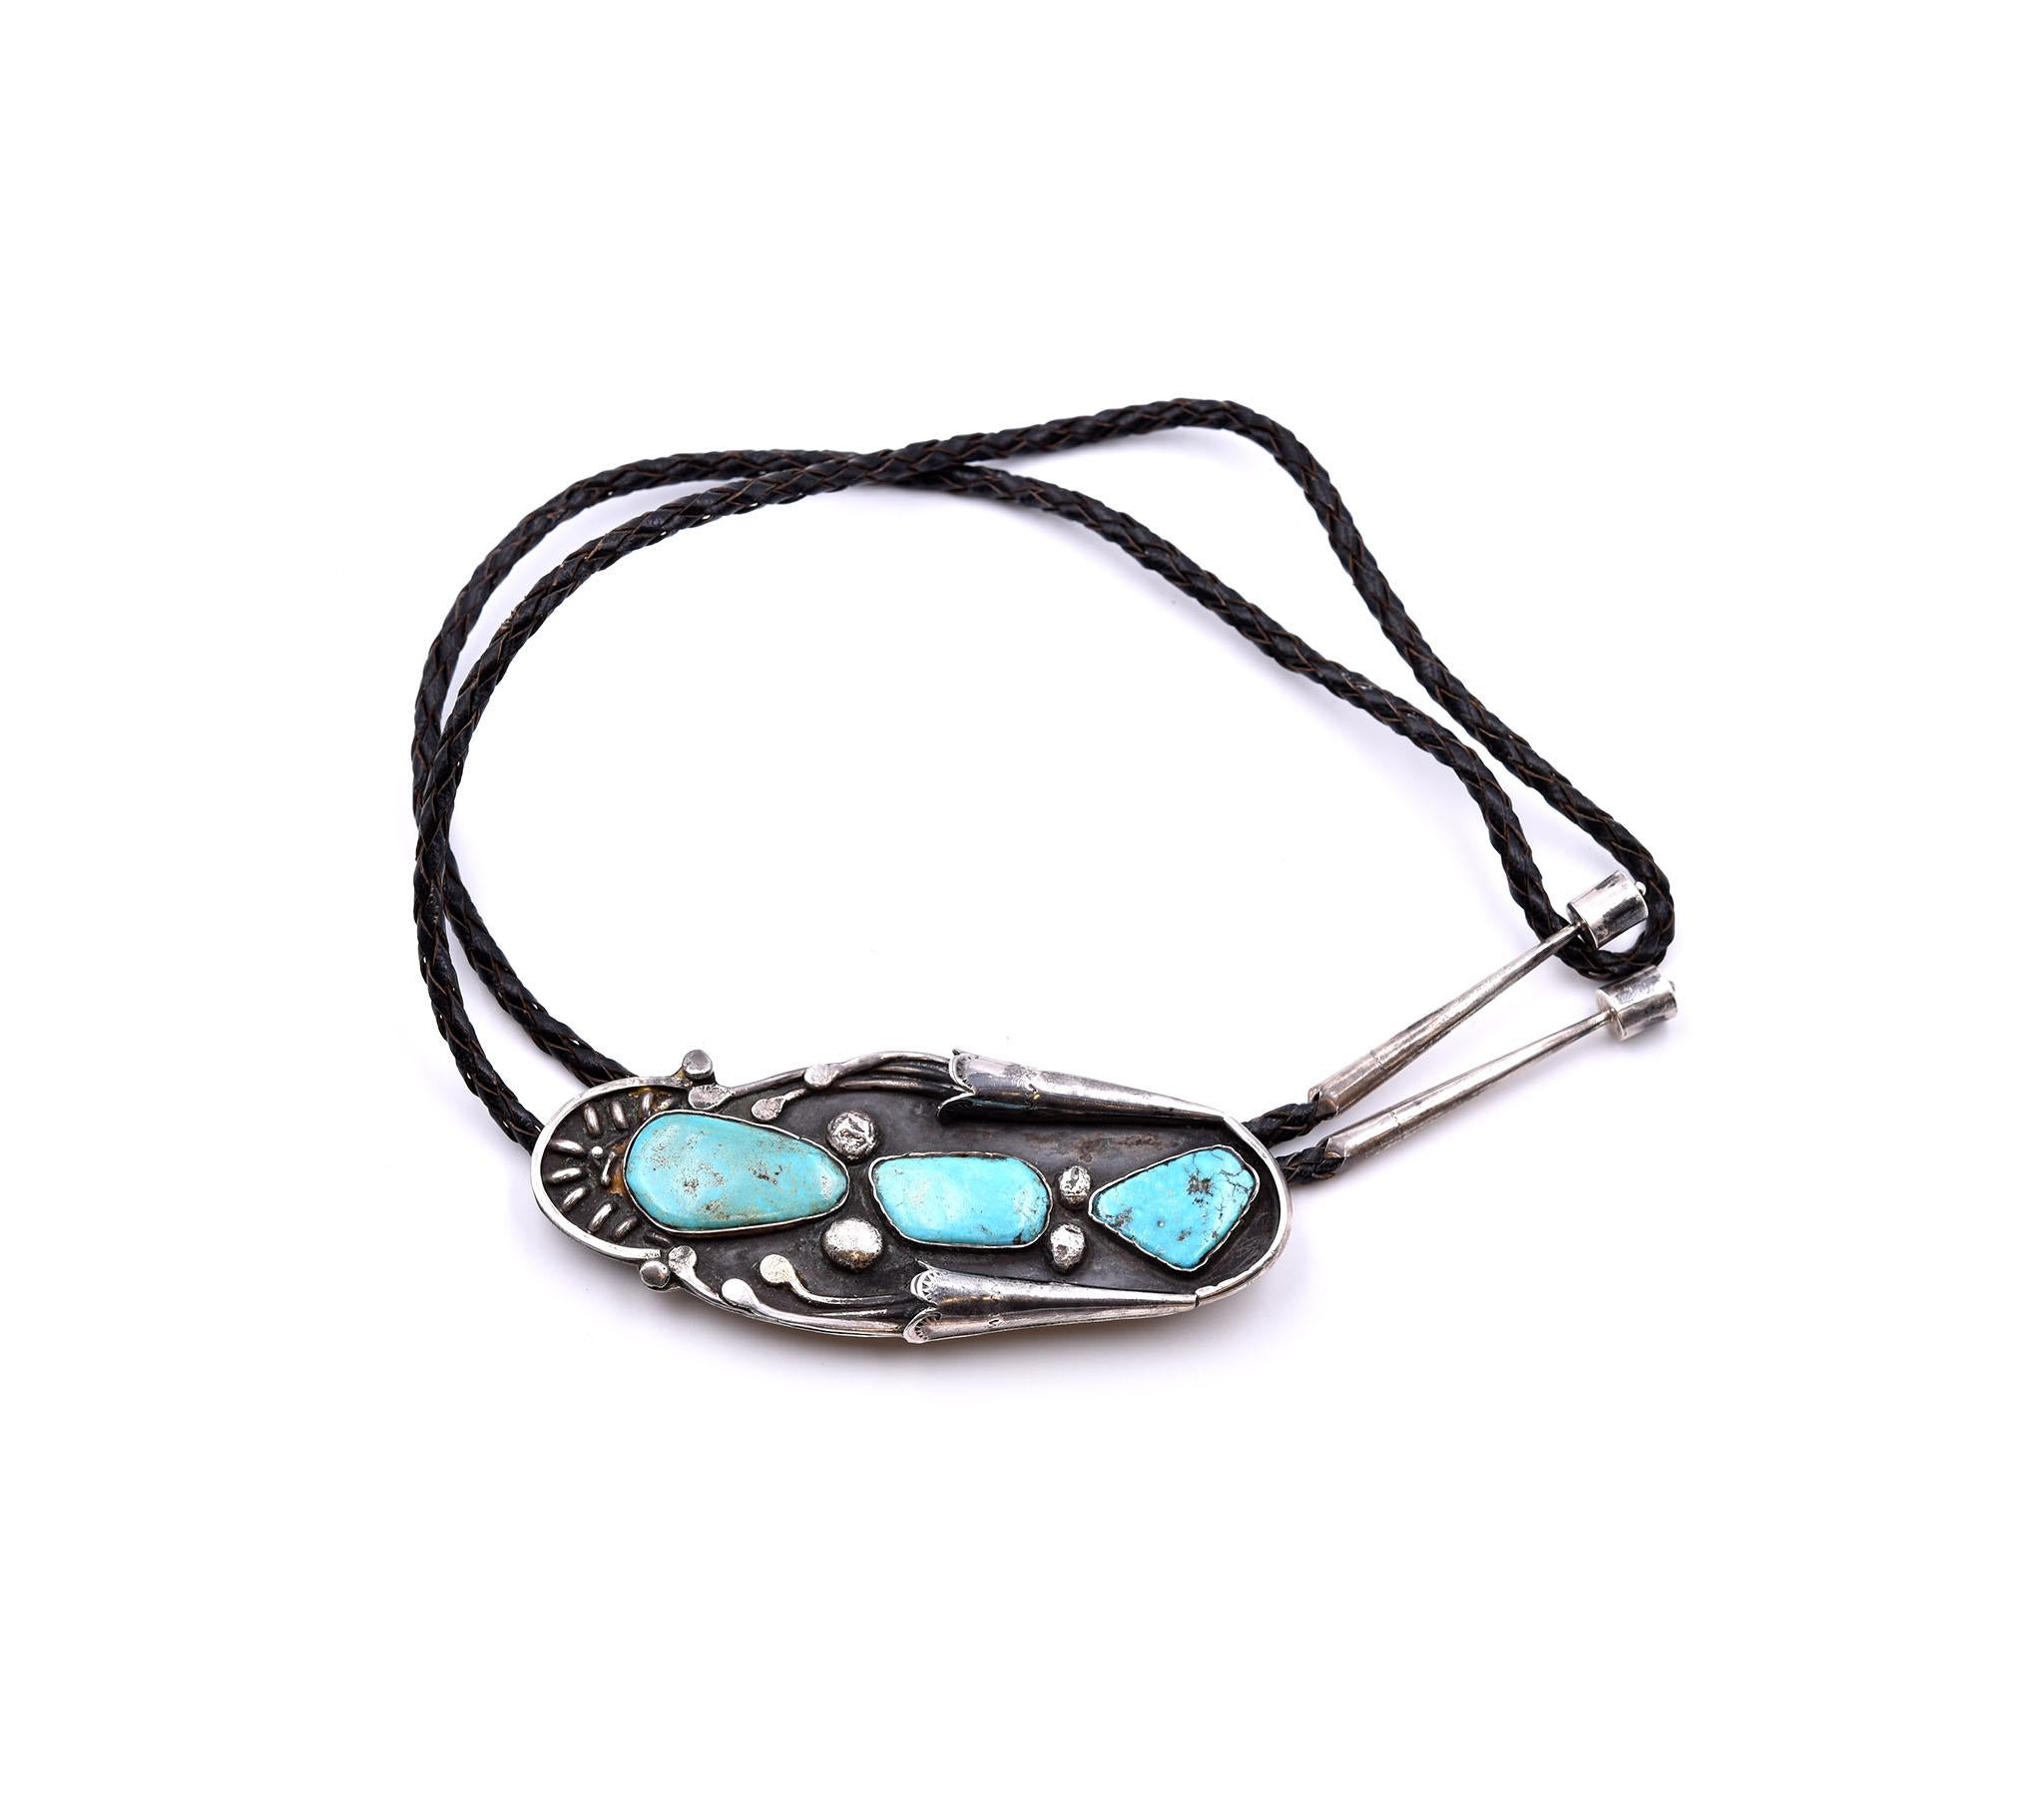 Designer: custom design and hallmarked “Bennett”
Material: sterling silver
Gemstones: turquoise
Dimensions: tie measures 19 inches in length and pendant measures 110mm x 45mm
Weight: 80.42 grams
